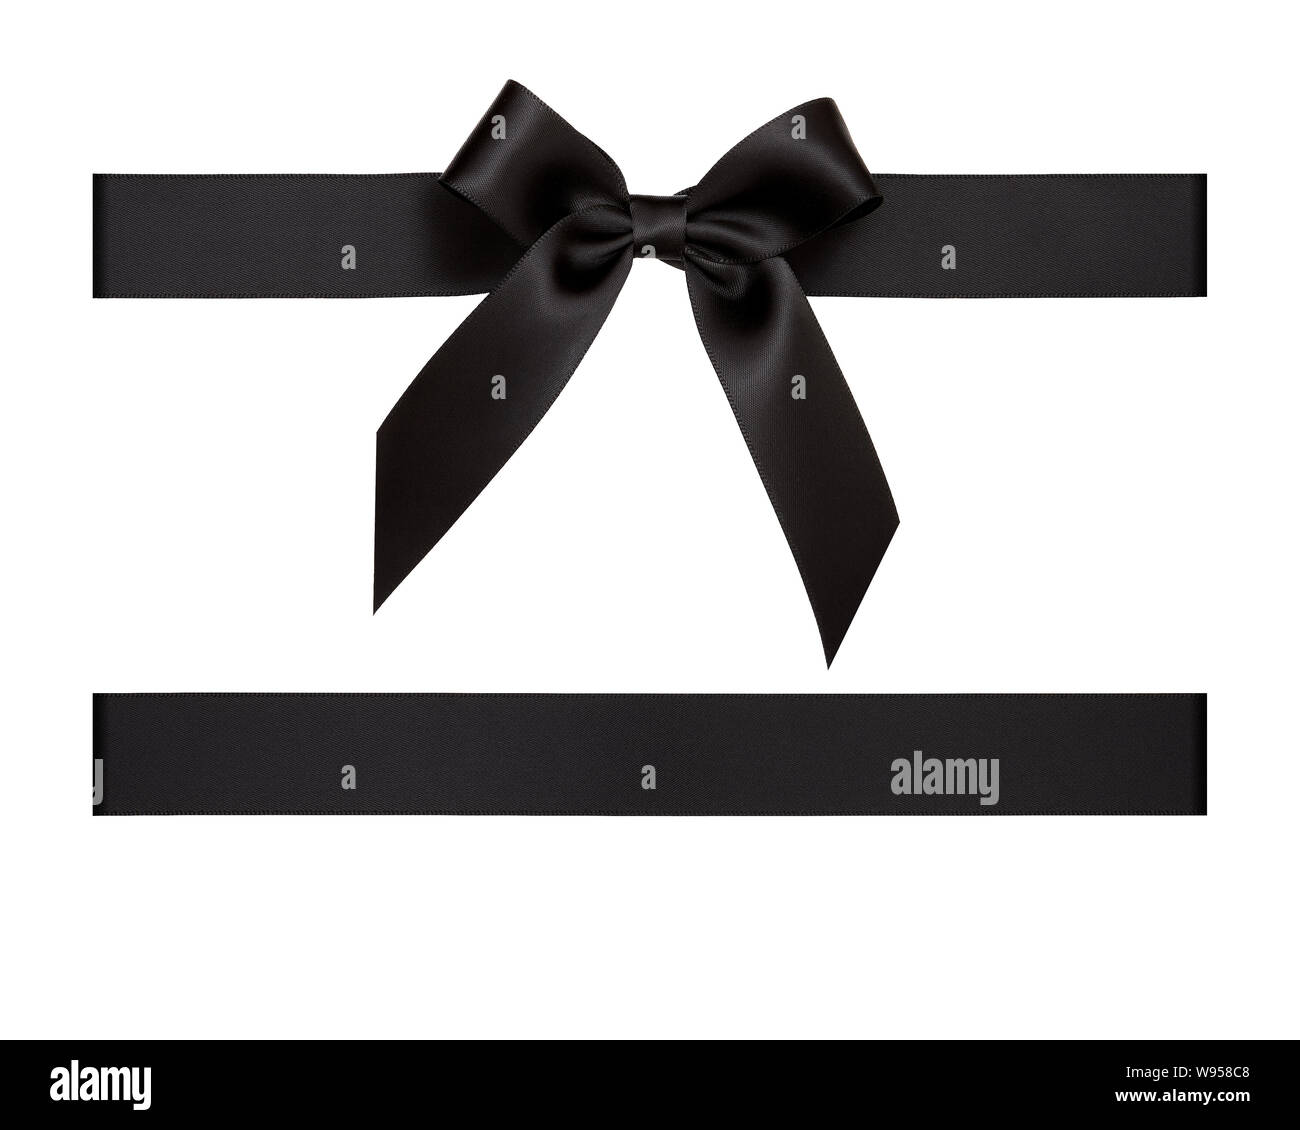 Black ribbon bow cut out and isolated on white background, black gift box ribbon decor Stock Photo